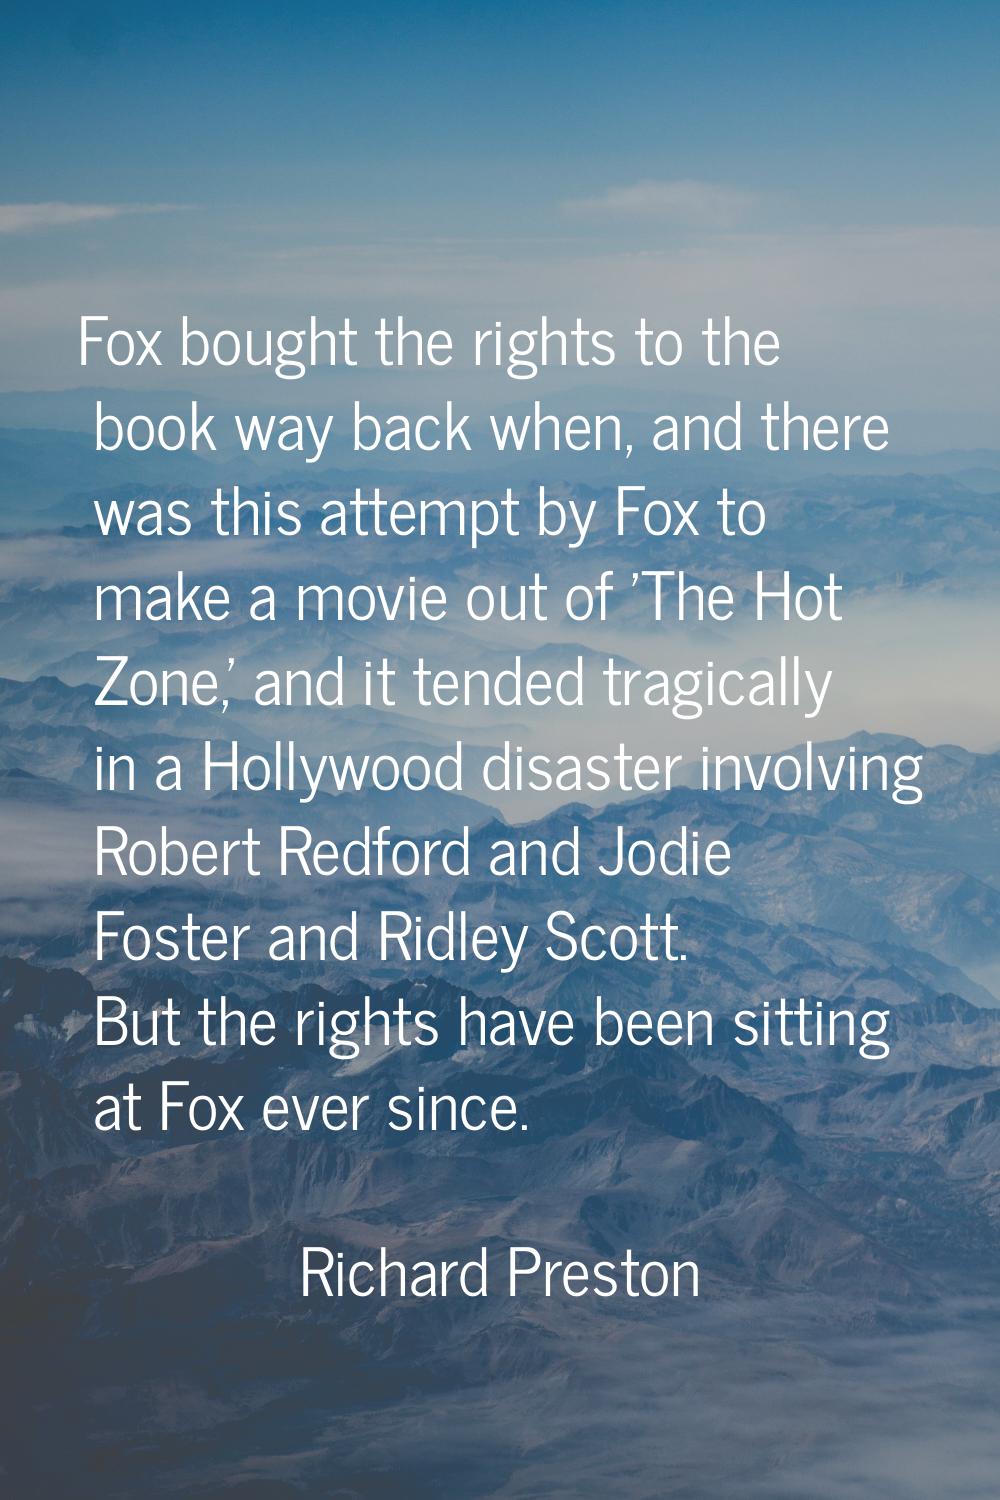 Fox bought the rights to the book way back when, and there was this attempt by Fox to make a movie 